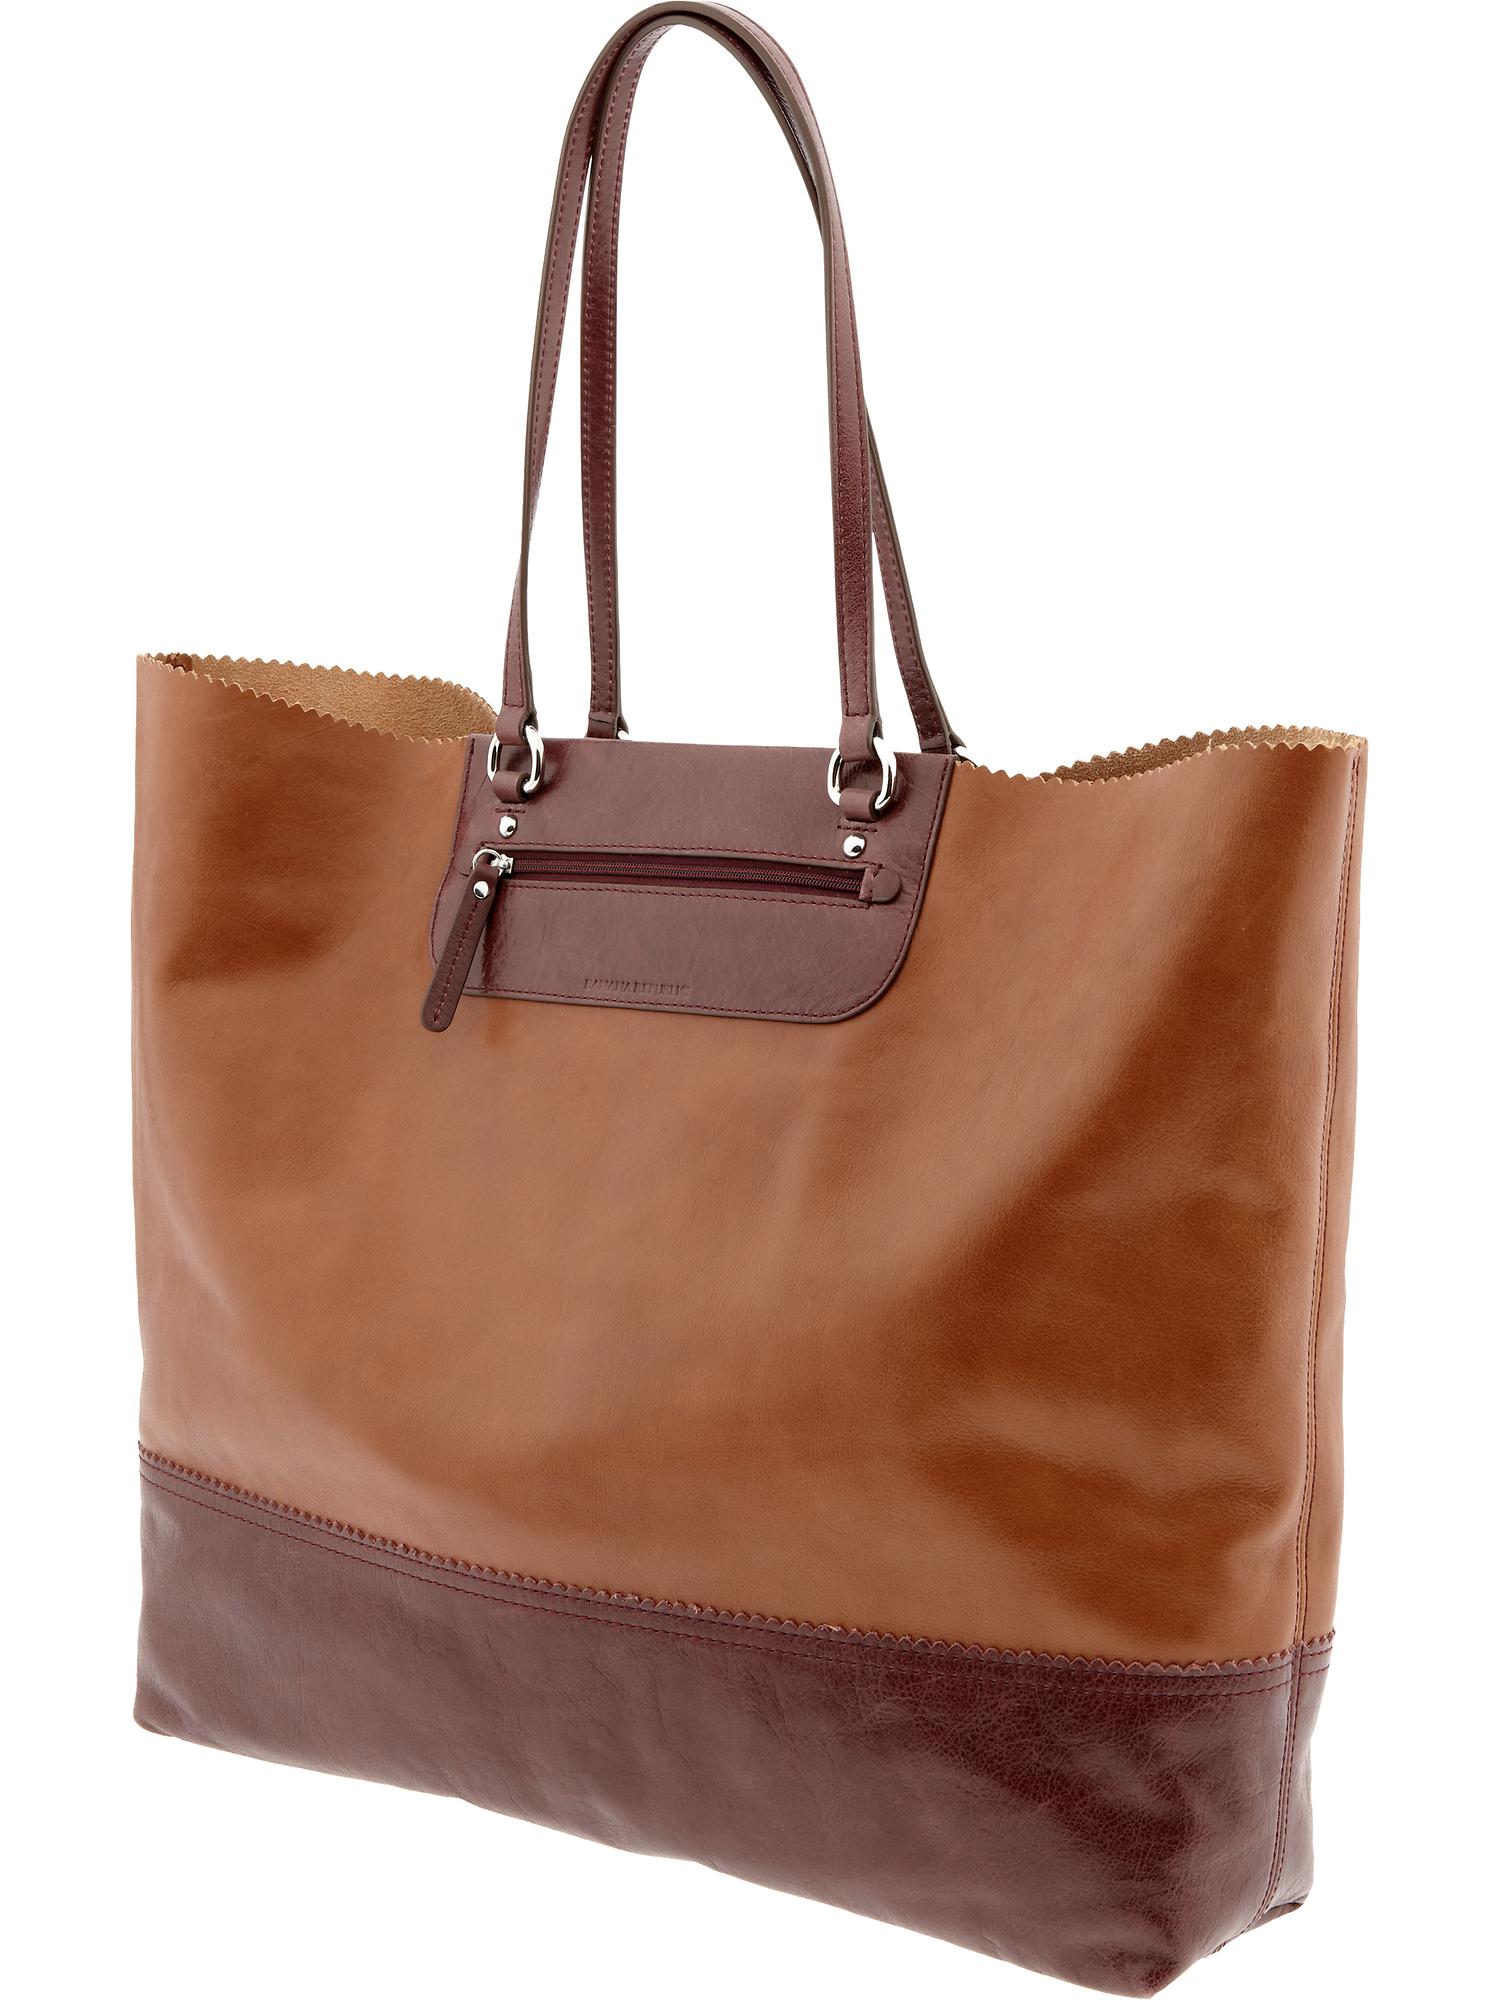 Paige colorblock leather tote